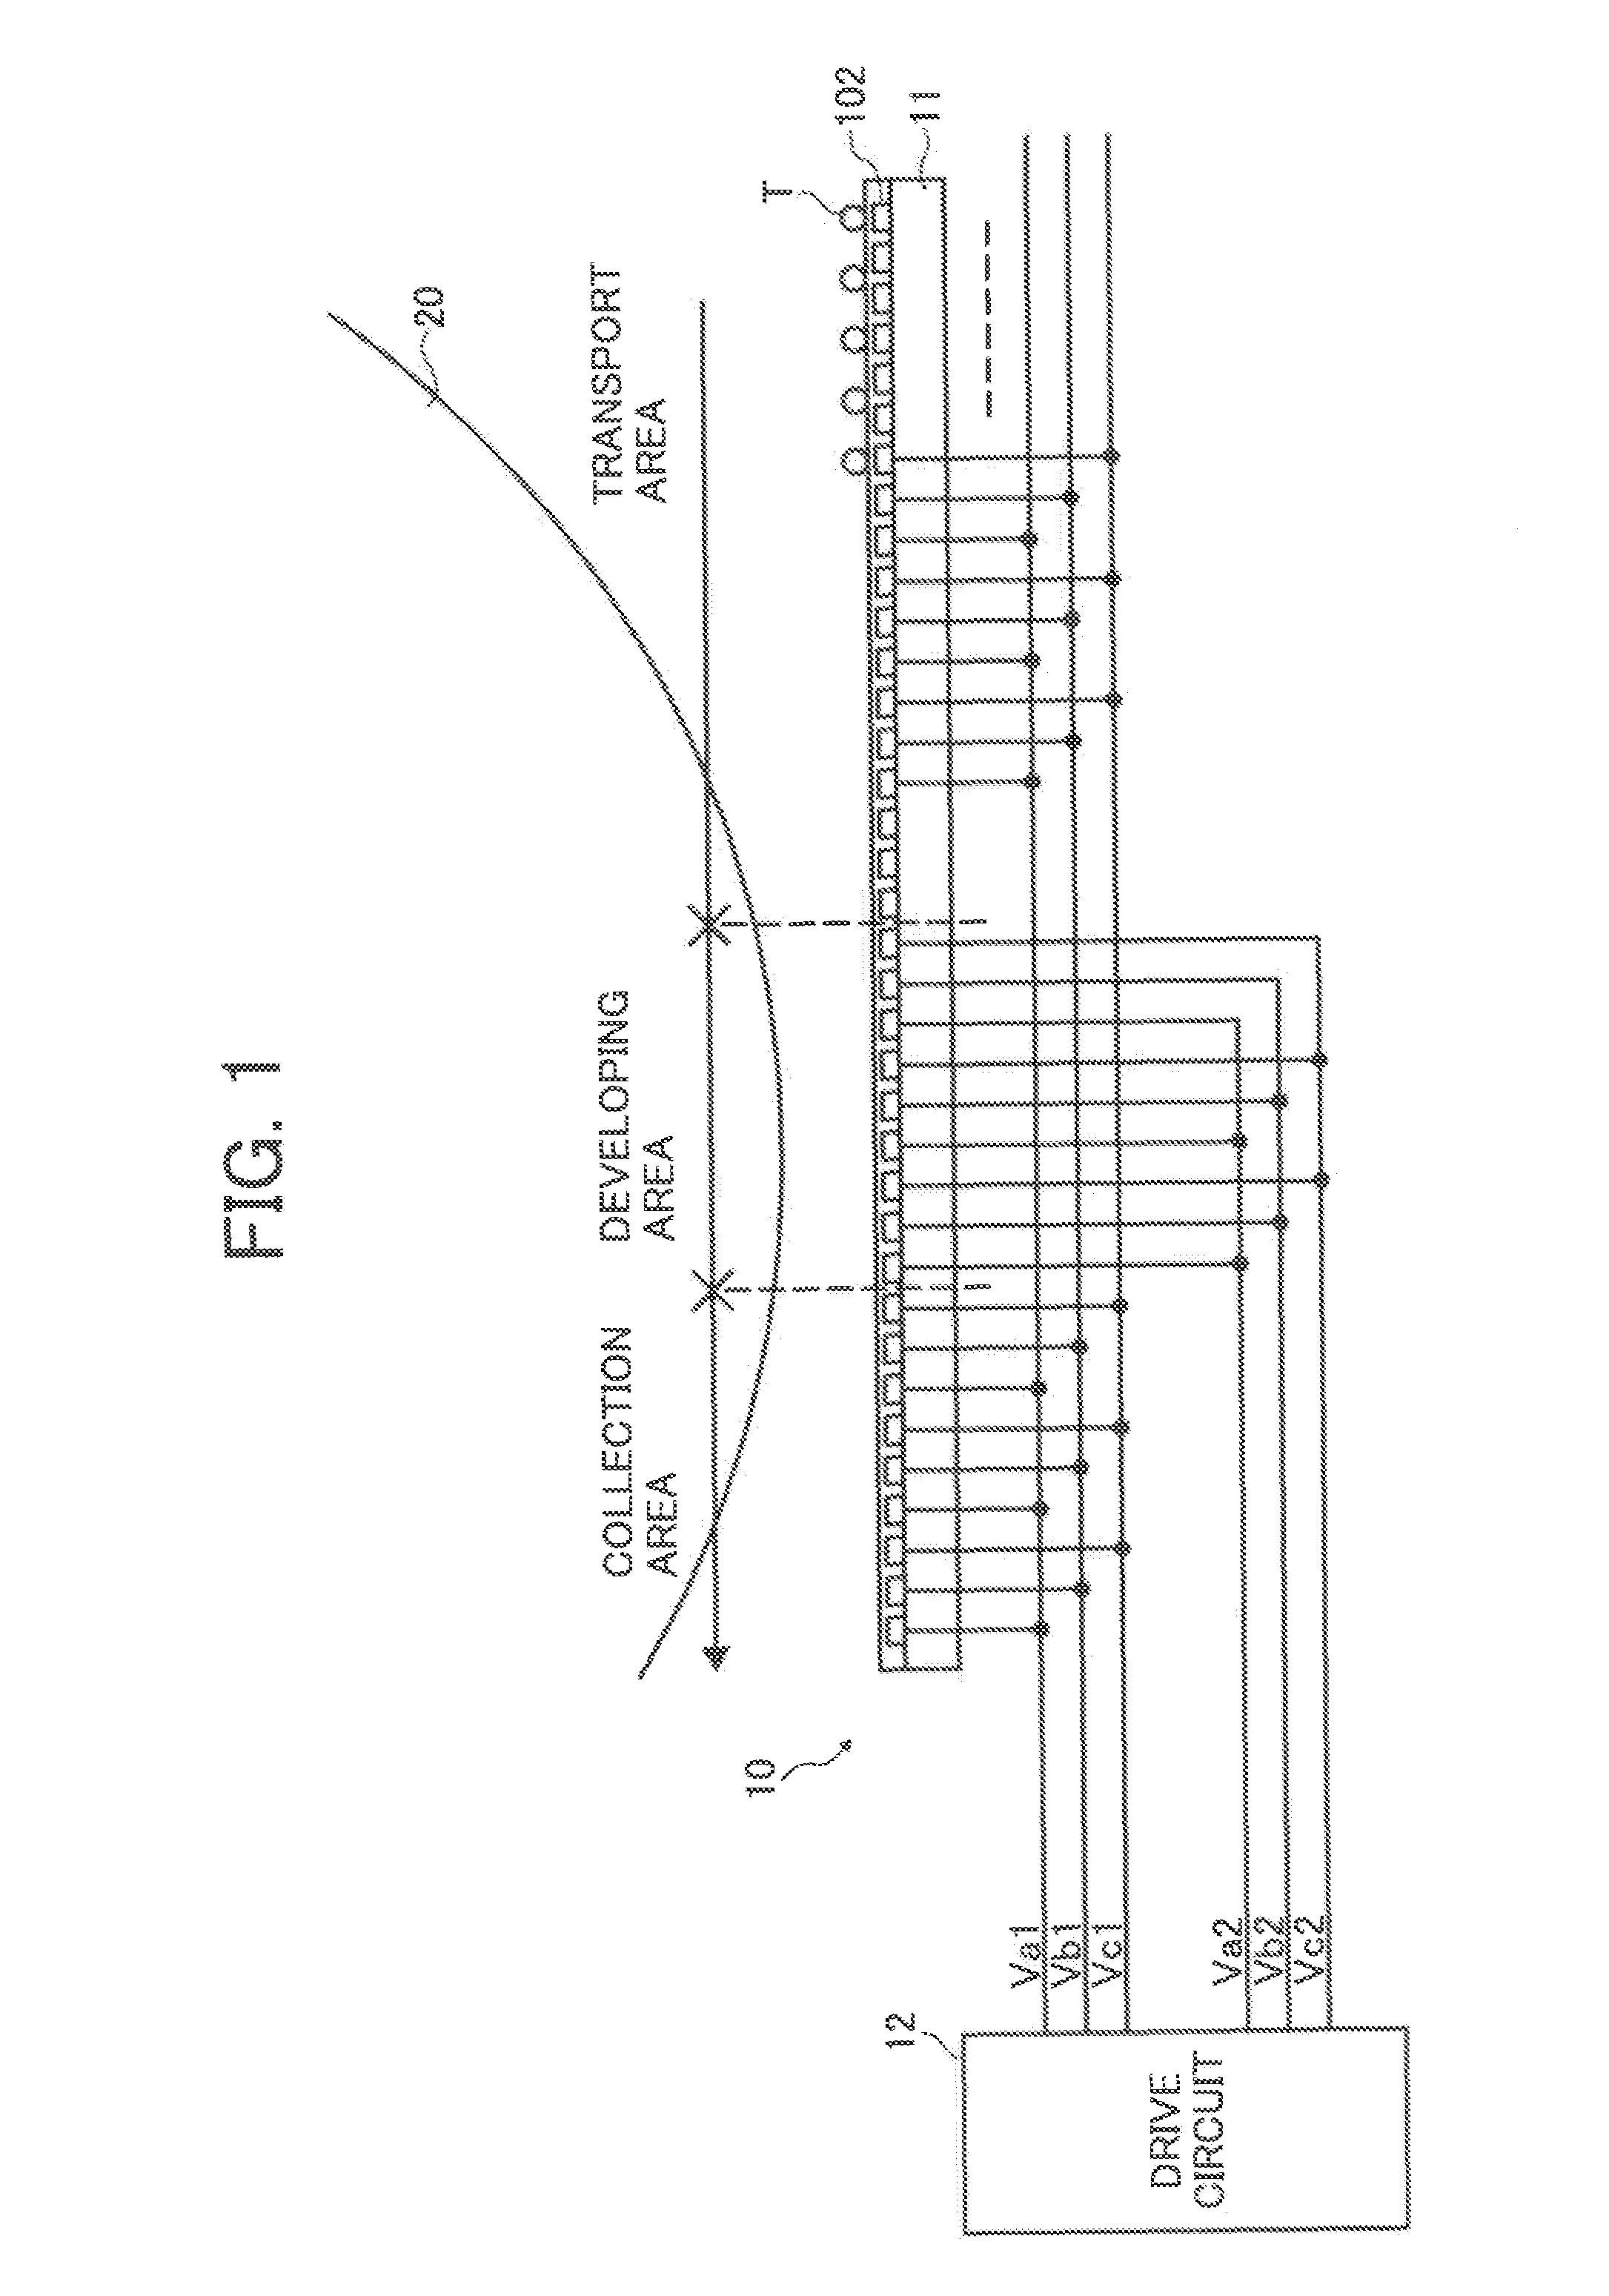 Developing device using electrostatic transport and hopping (ETH)